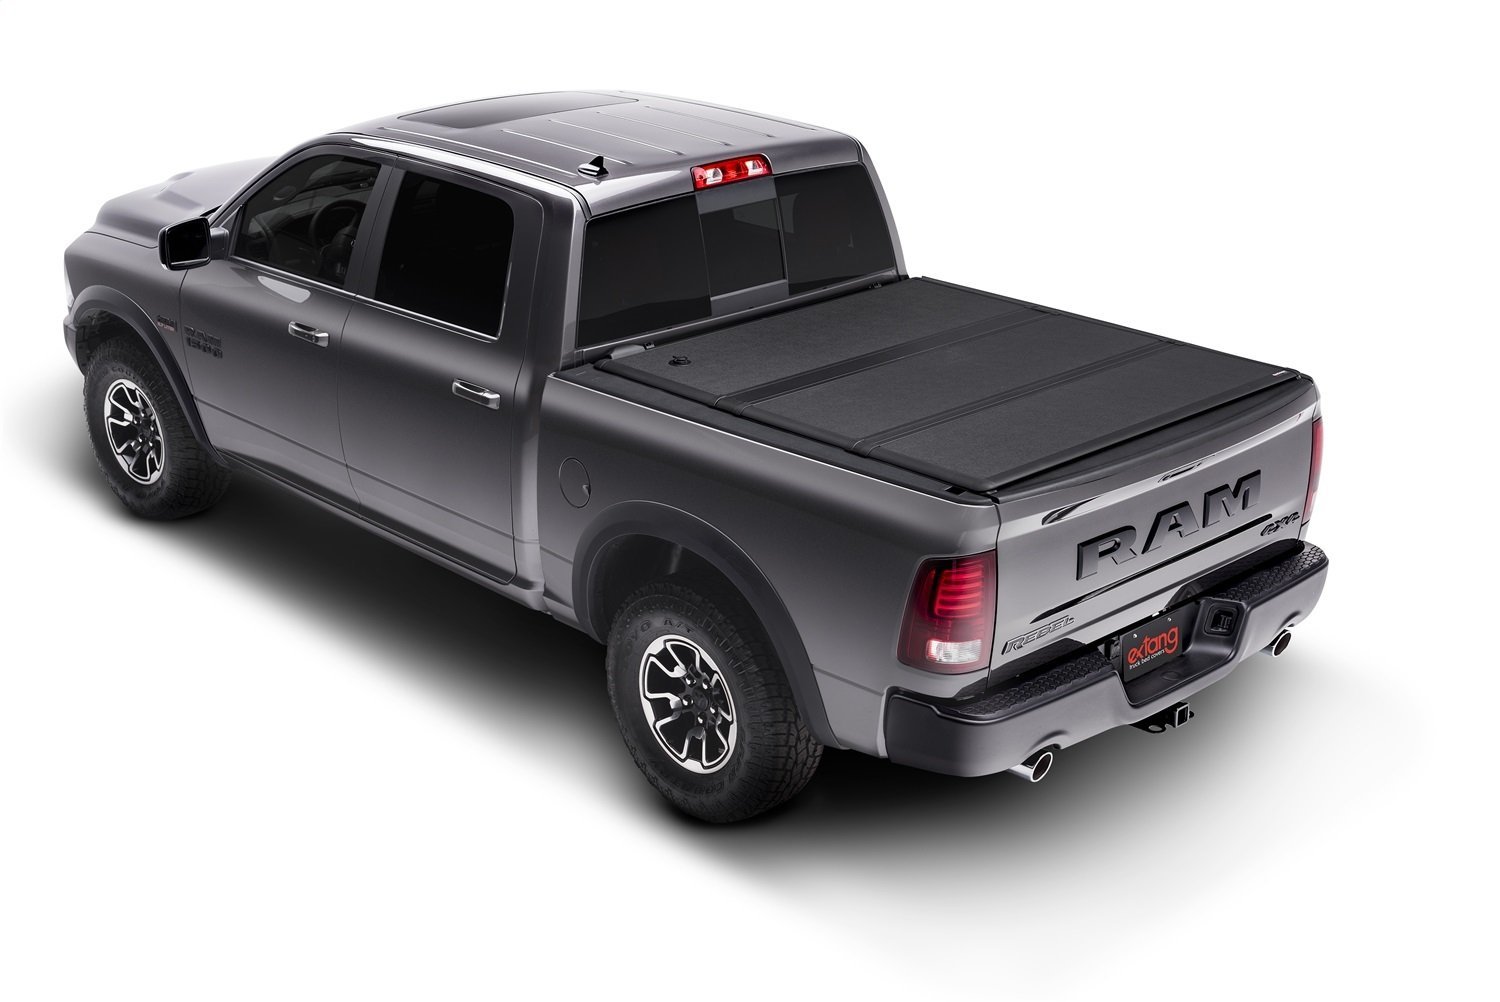 Best exhaust system for Ram 1500